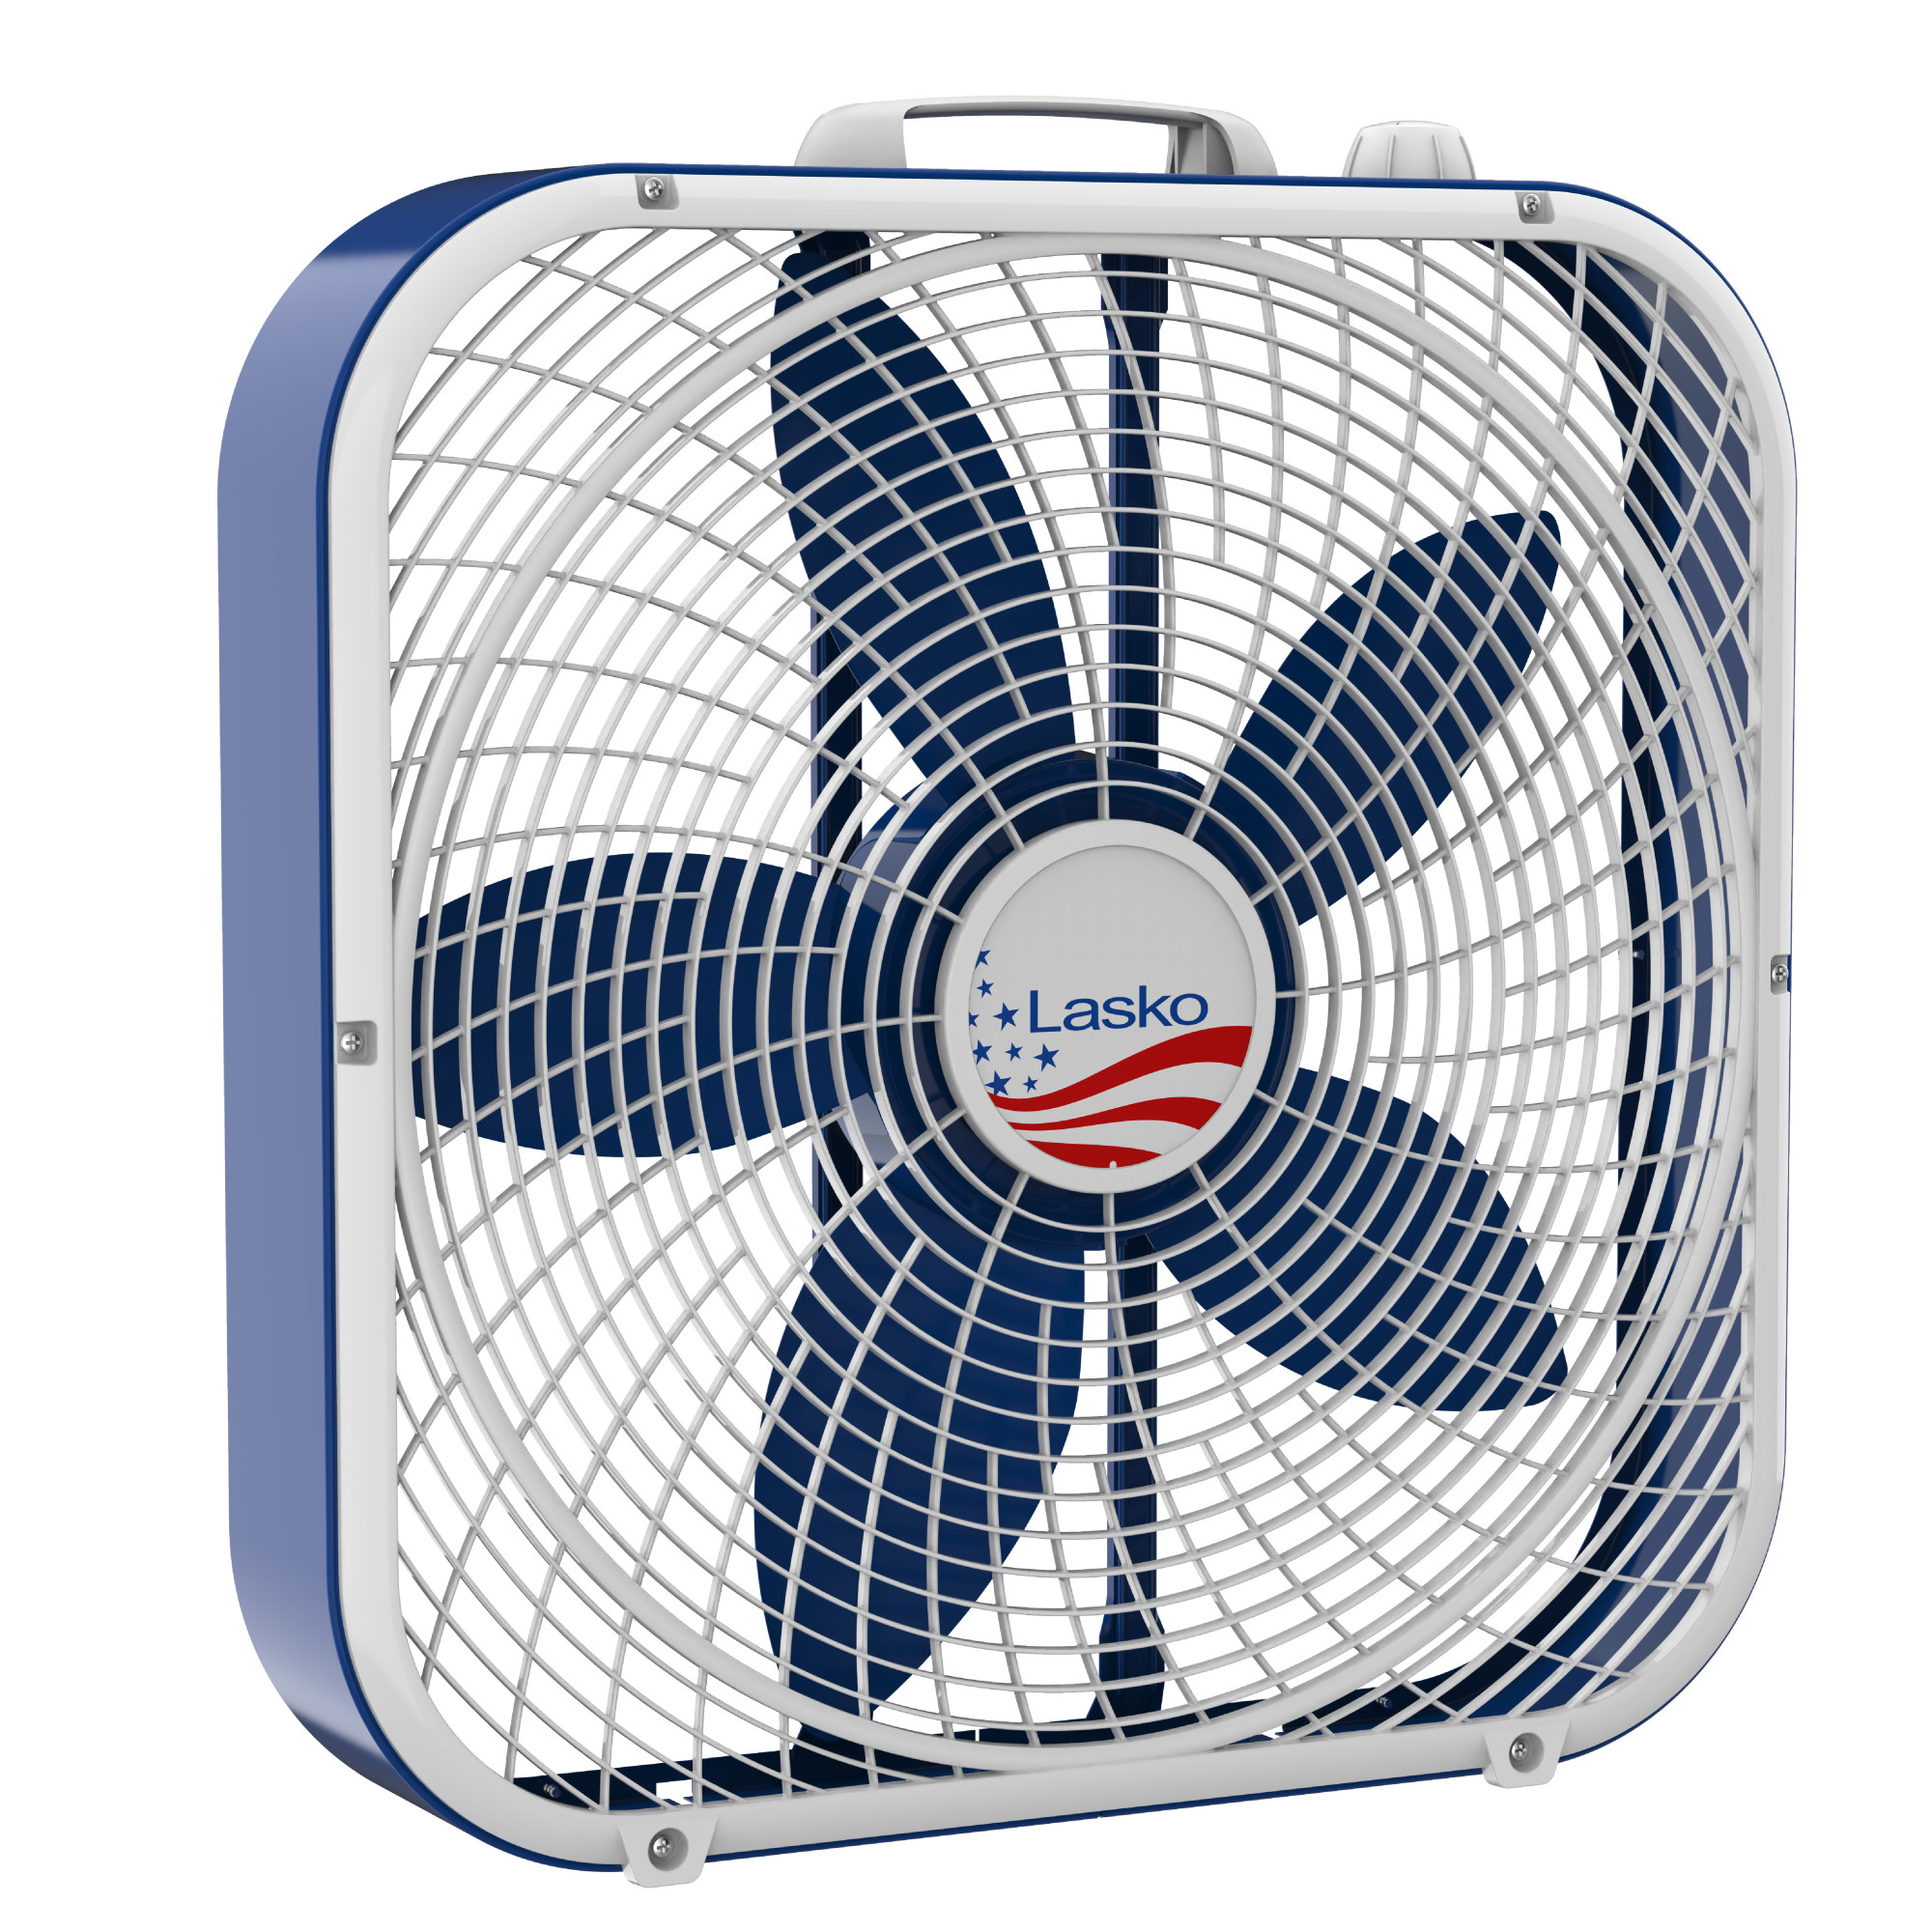 Lasko 20" Limited Edition Box Fan with 3 Speeds, 22.5" High, Red, White & Blue, B20610, New - image 1 of 11